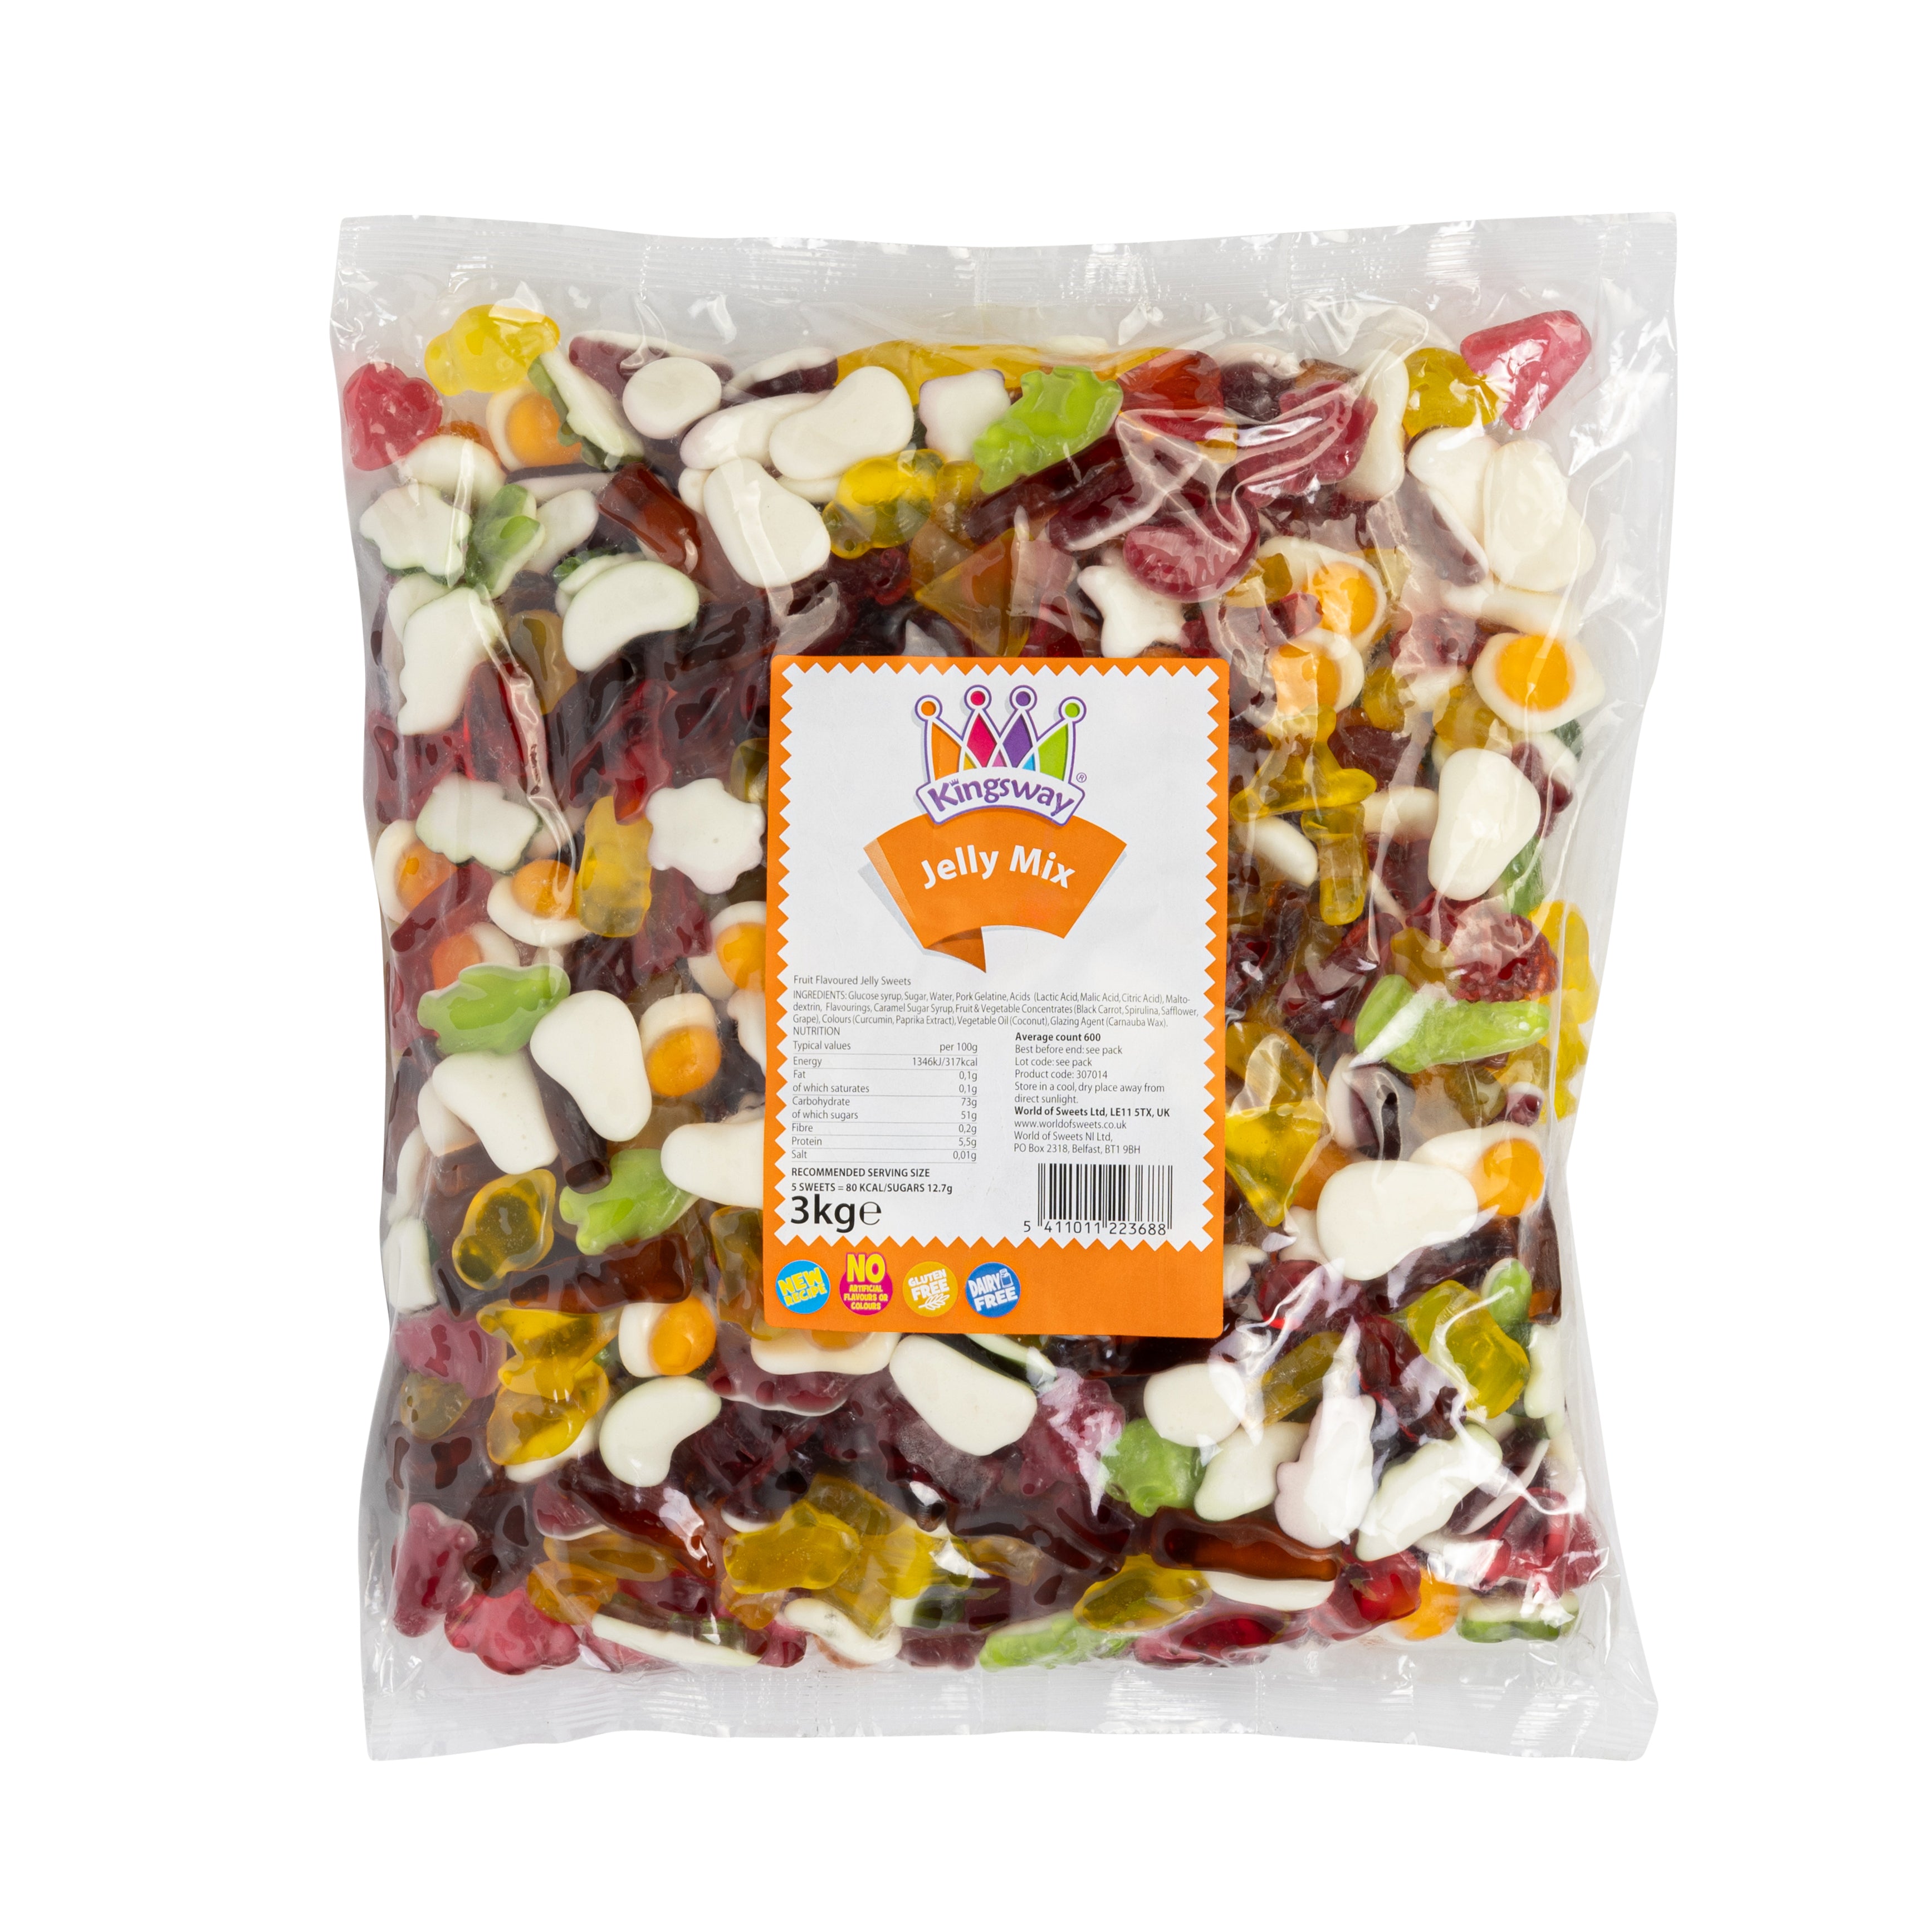 Kingsway Jelly Mix 3kg